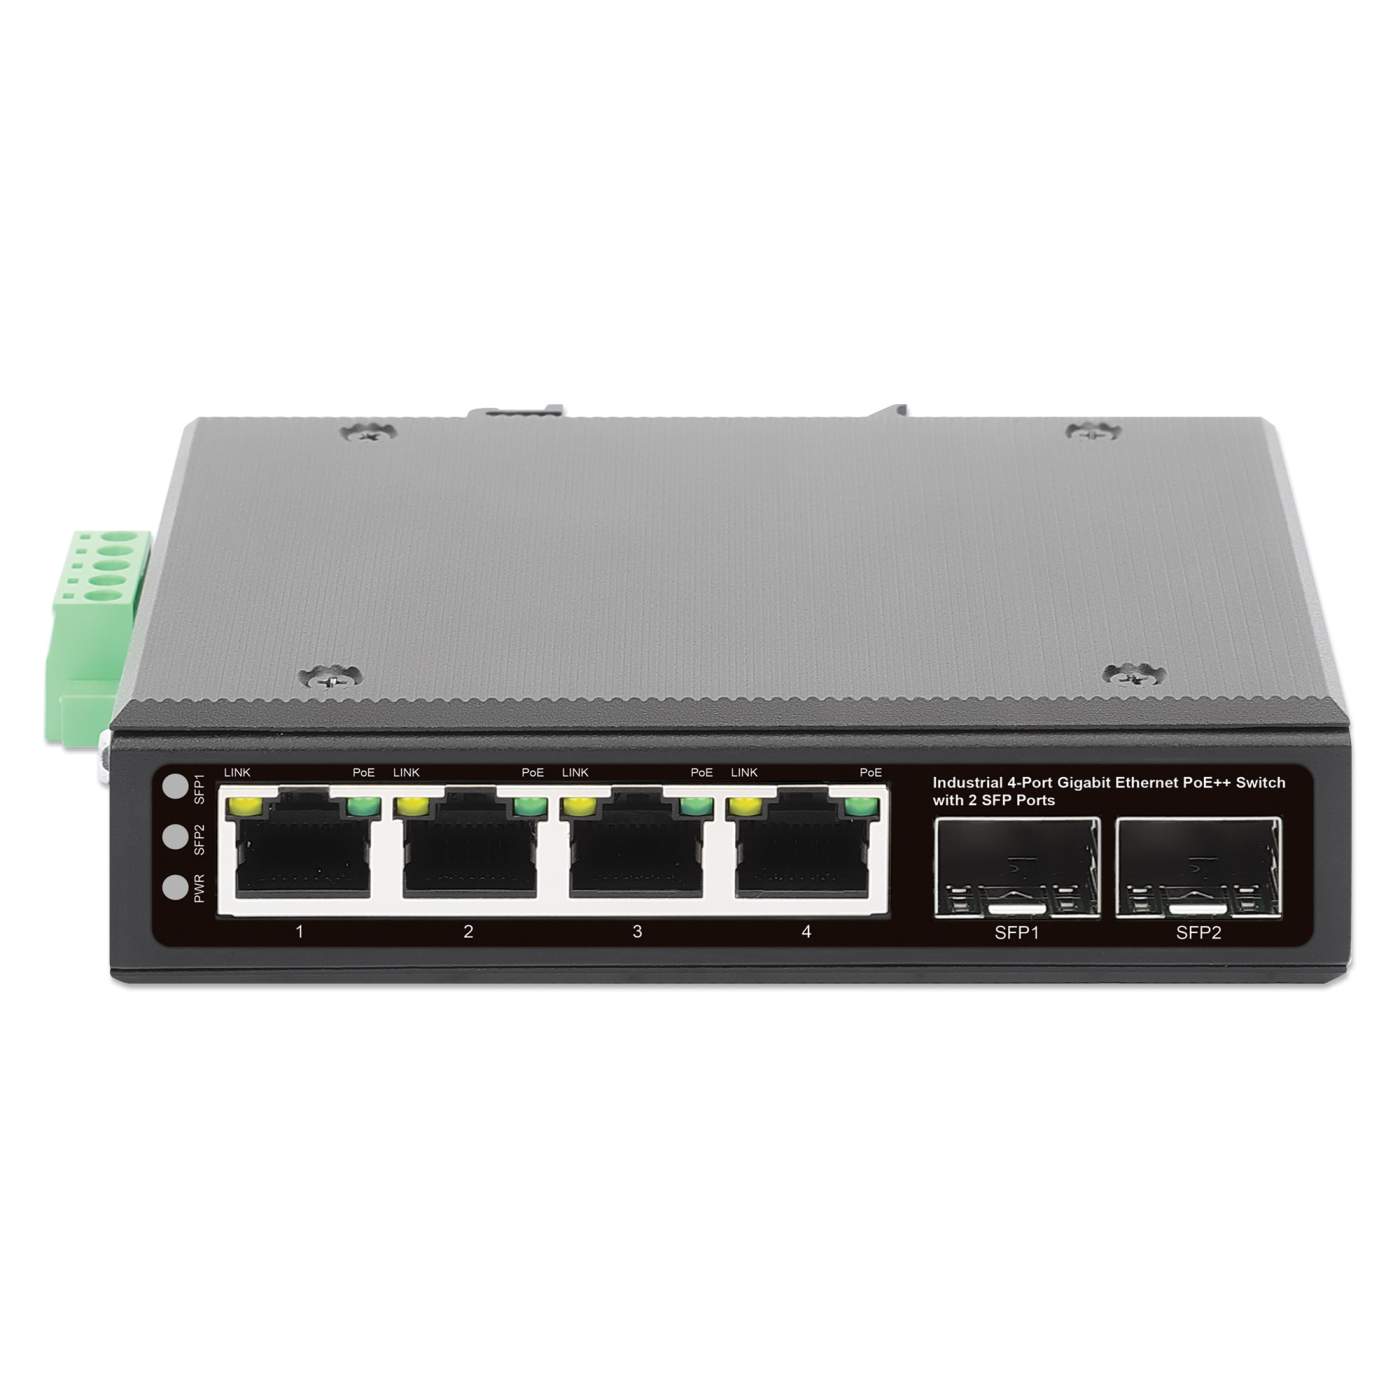 Industrial 4-Port Gigabit Ethernet PoE++ Switch with 2 SFP Ports Image 4